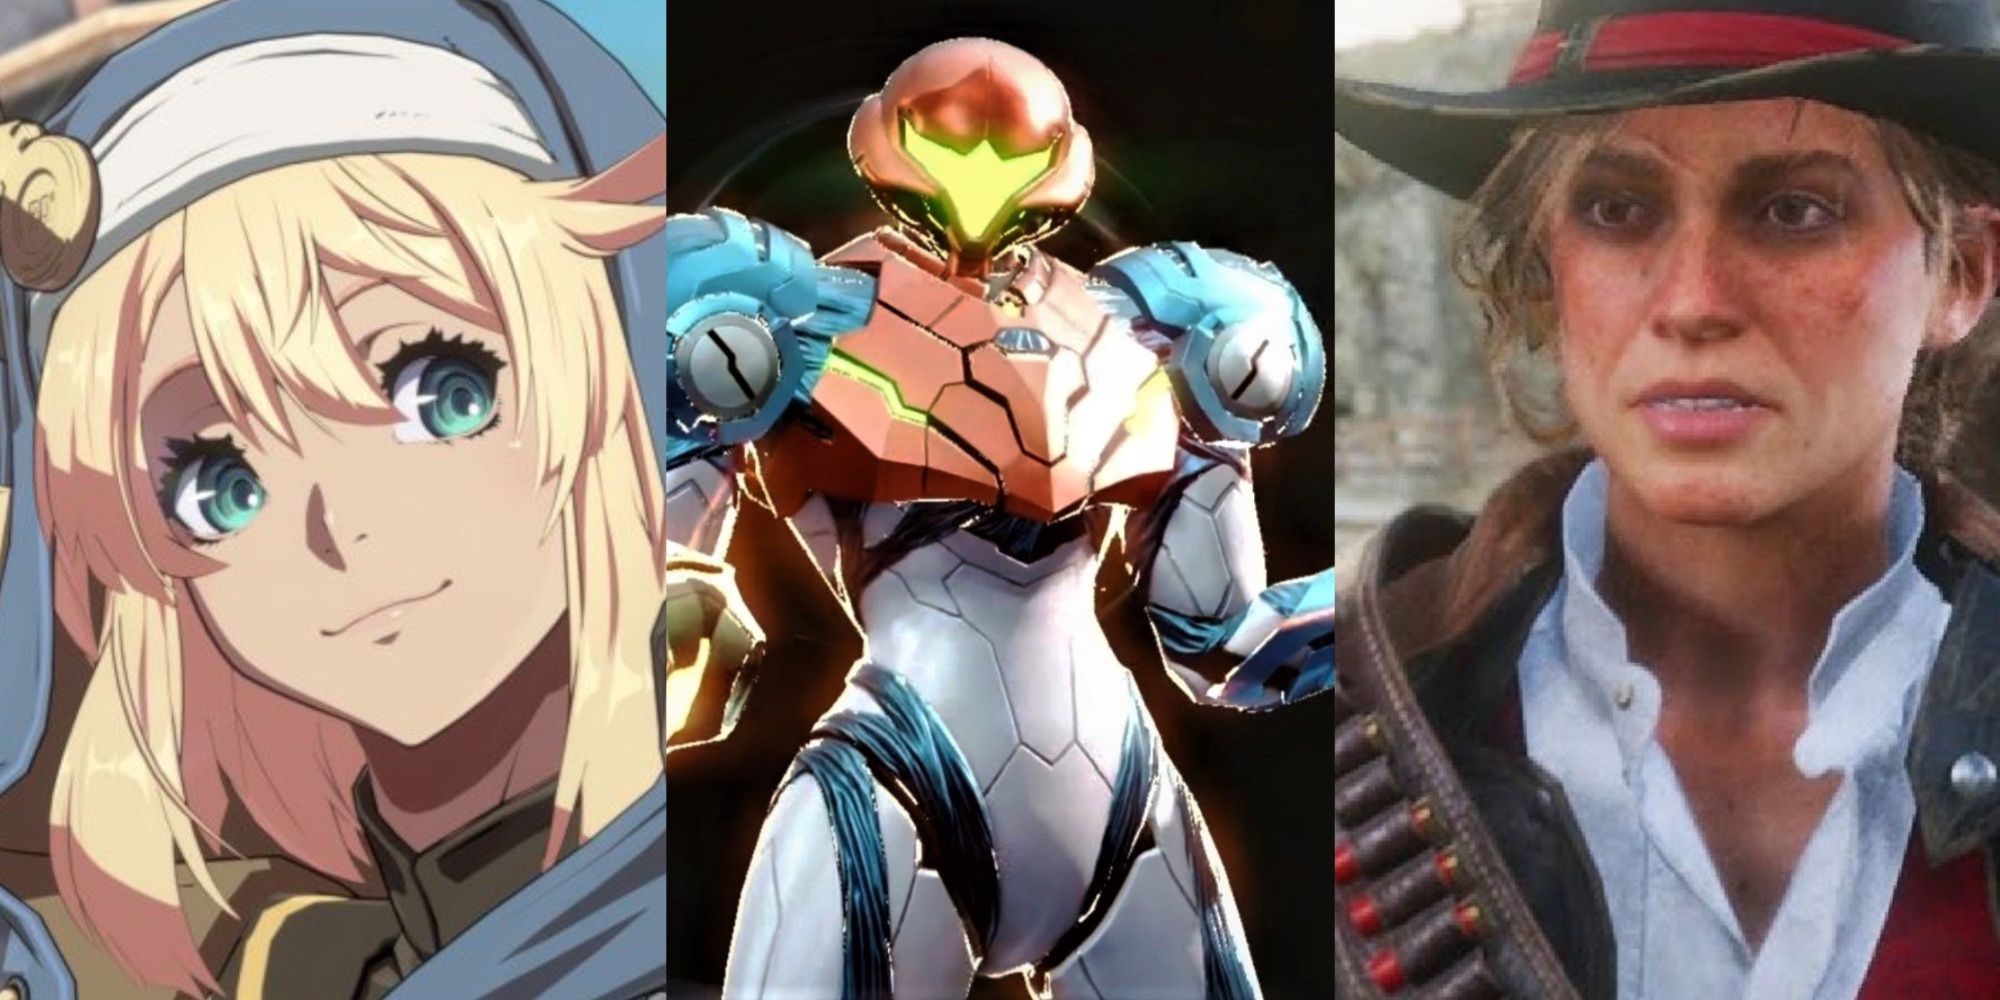 Close up of Bridget from Guilty Gear, Samus as she gets an upgrade in Metroid Dread, and Sadie grimacing from Red Dead Redemption, left to right